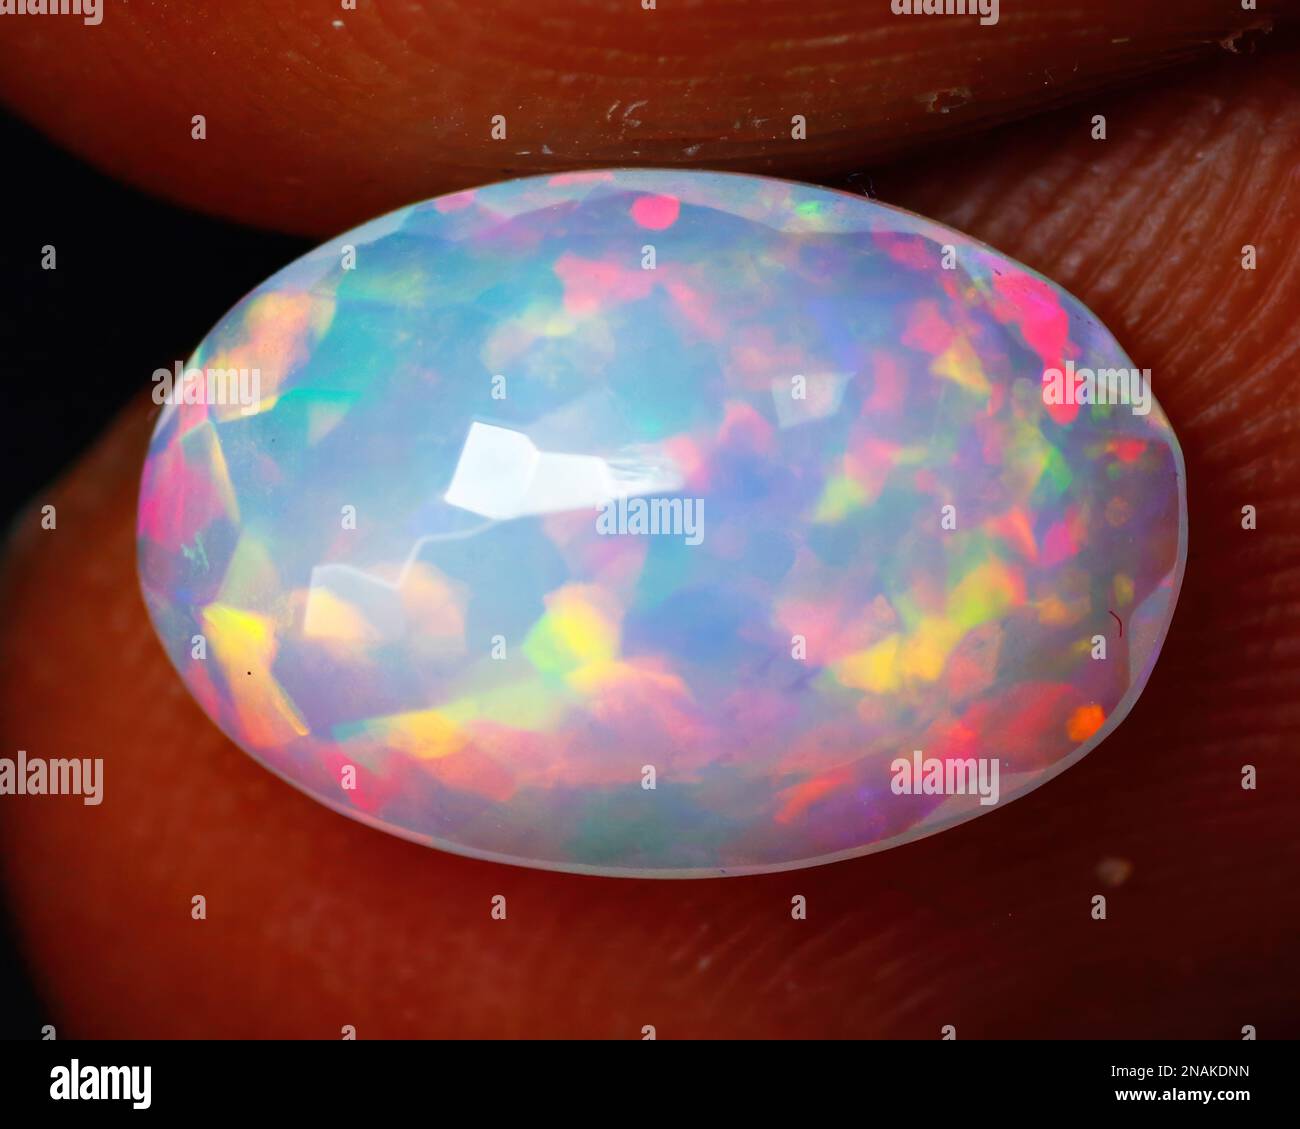 Natural gemstone noble opal on a black background Stock Photo